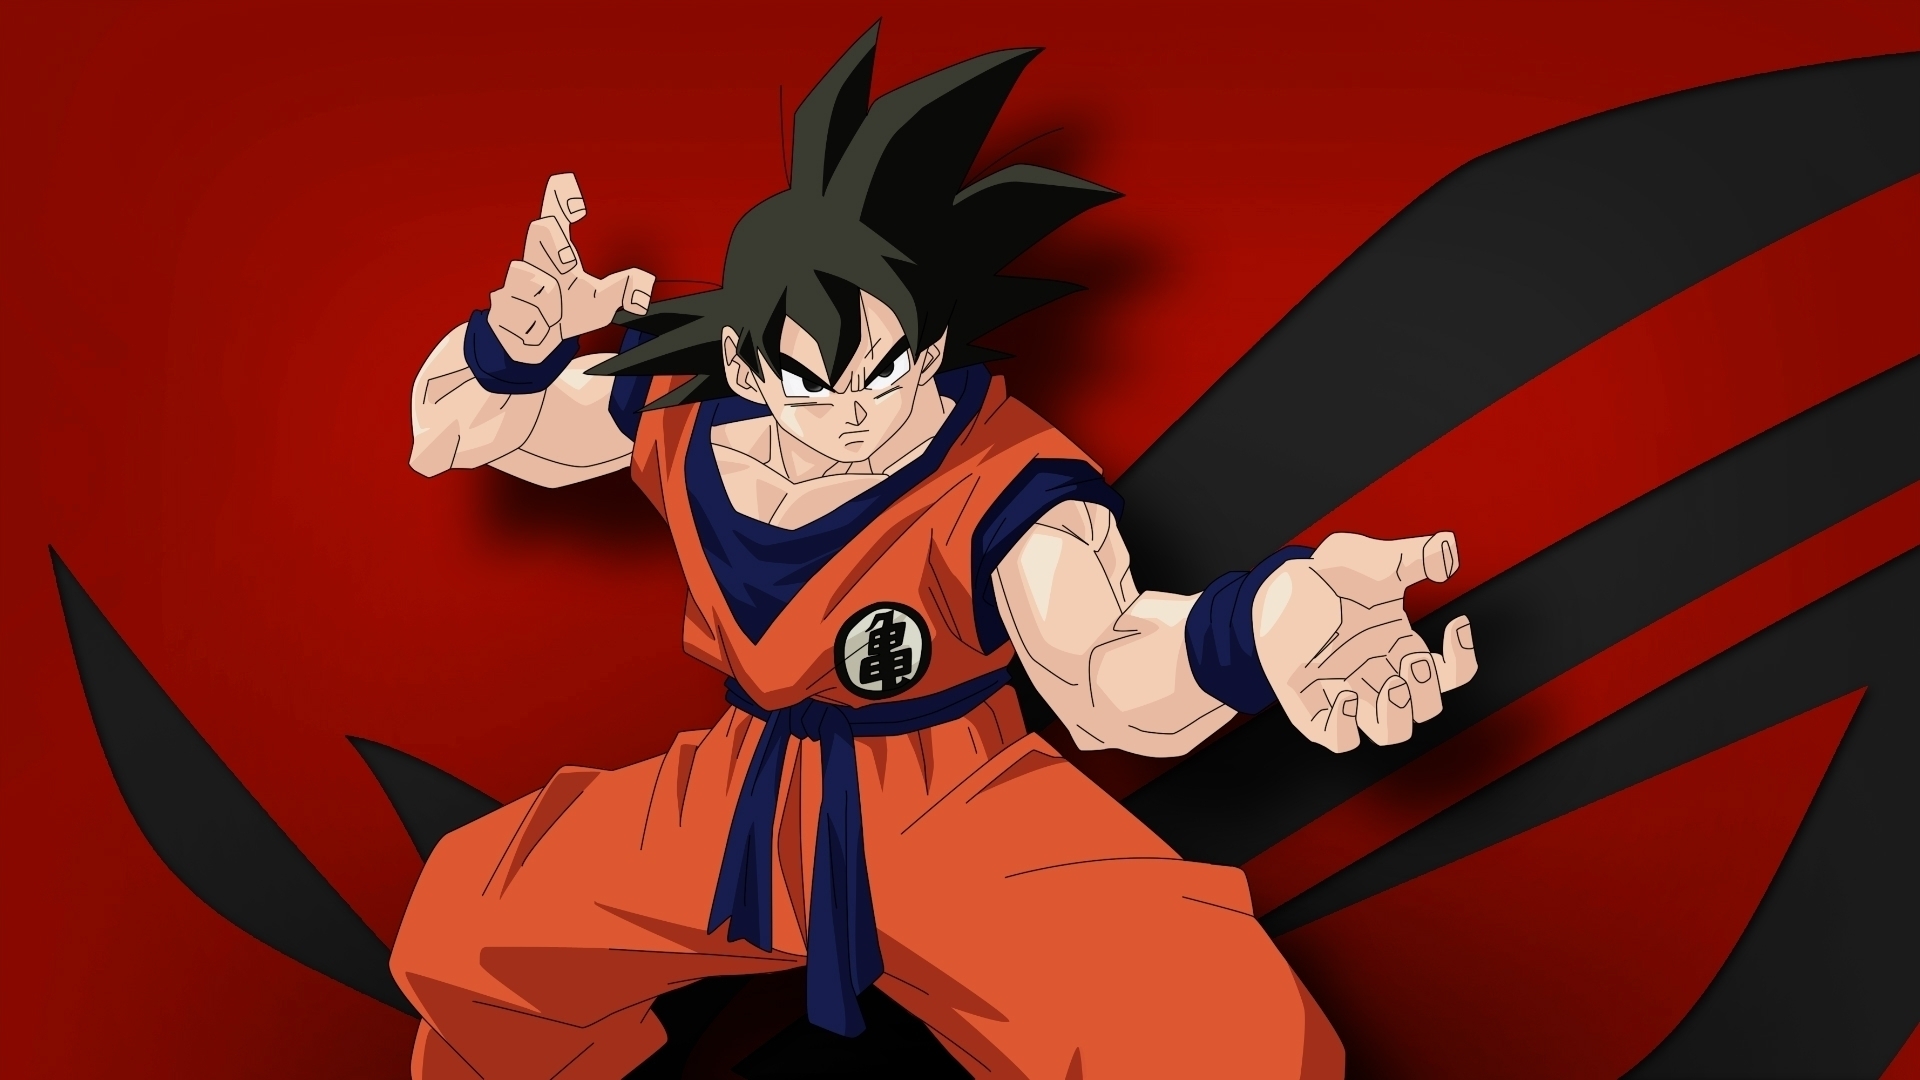 Goku With All Red 4K wallpaper download